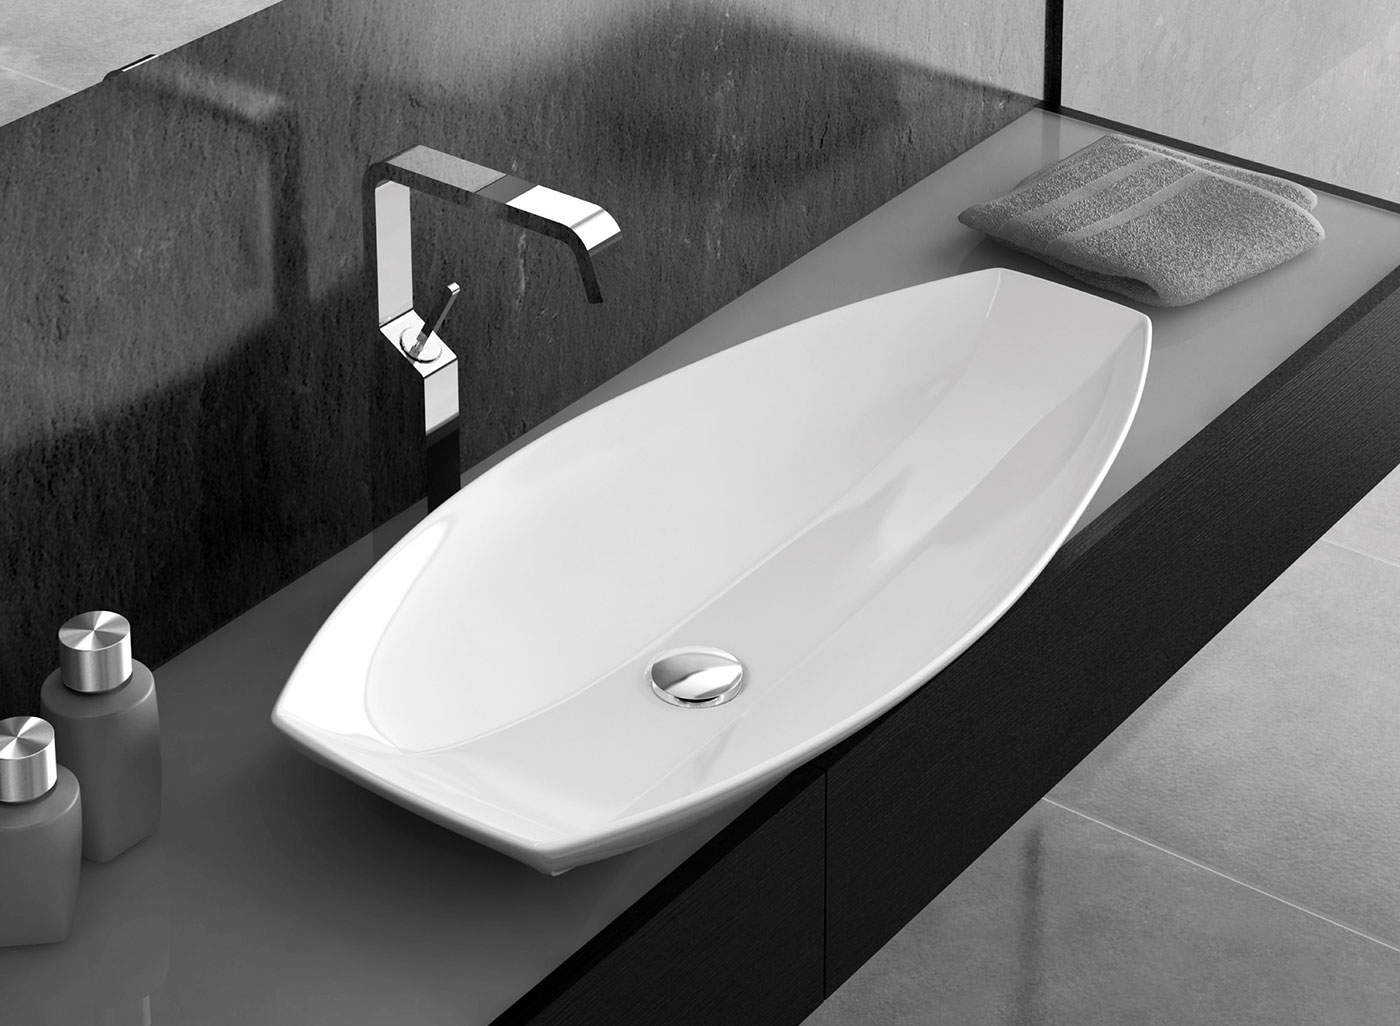 Ca'Tron Maxi is an elegant and practical bench mounted basin more like a decorative object. A real statement piece.